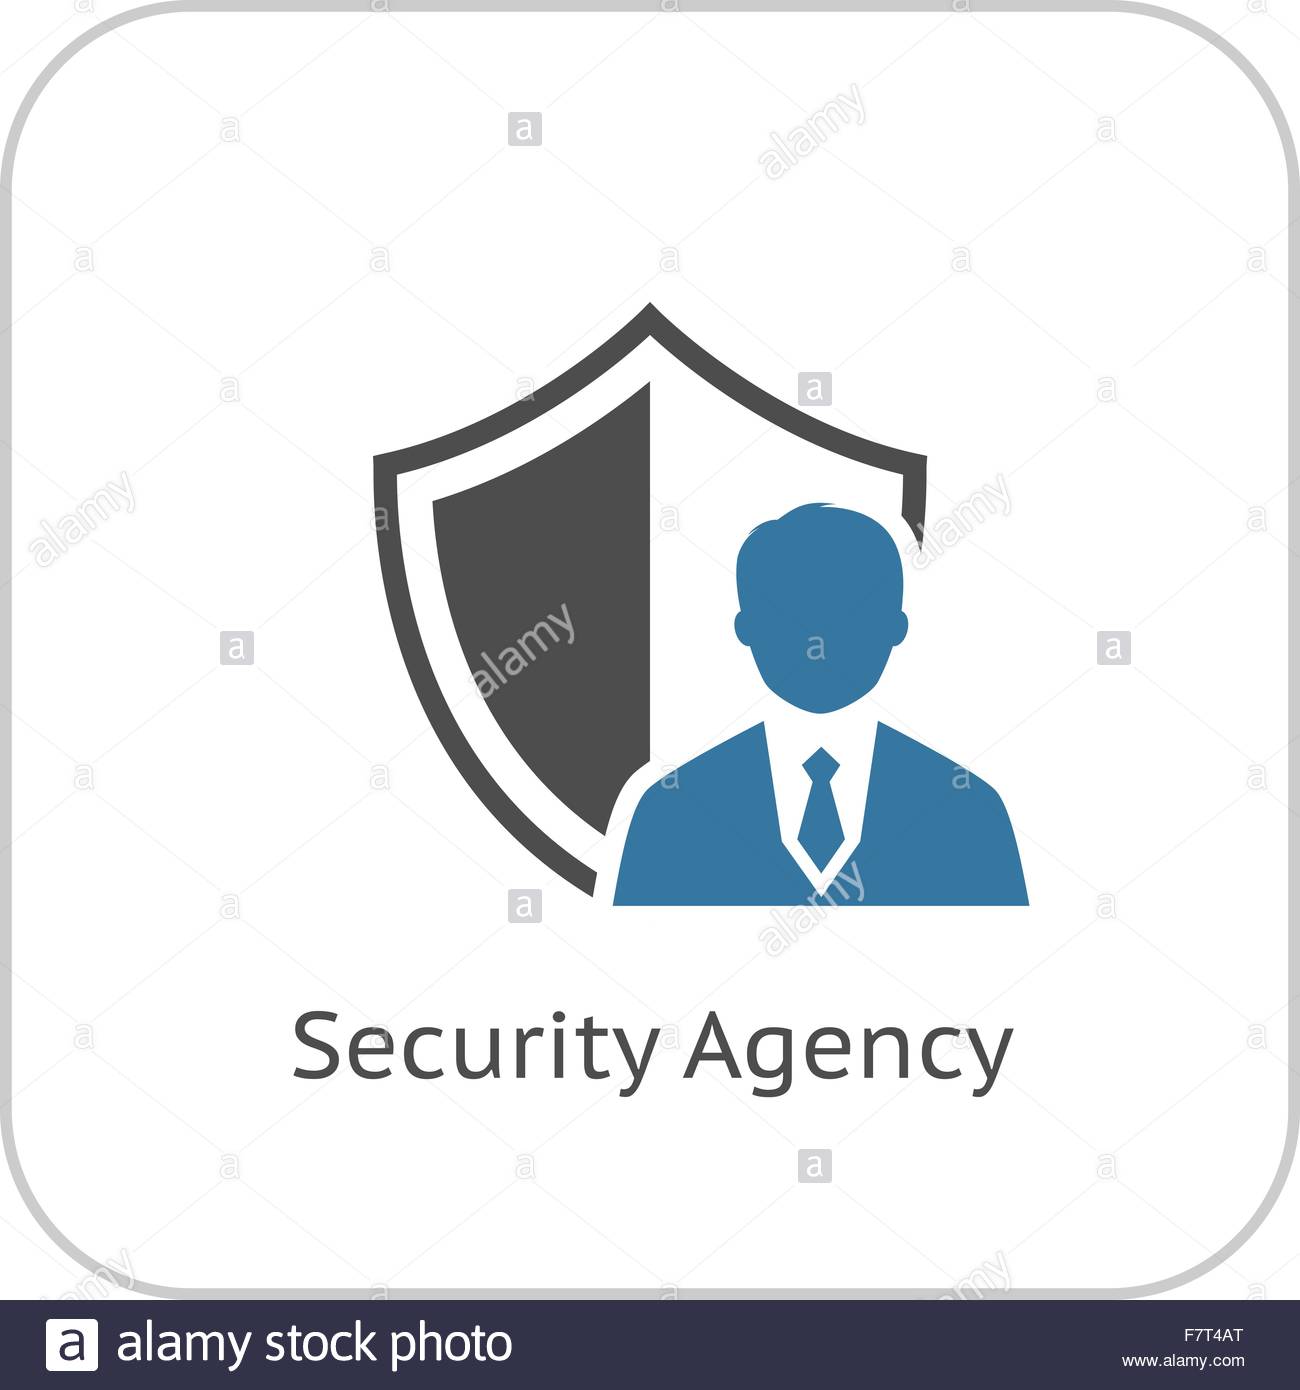 Agency, agent, boss, detective, police, spy, thief icon | Icon 